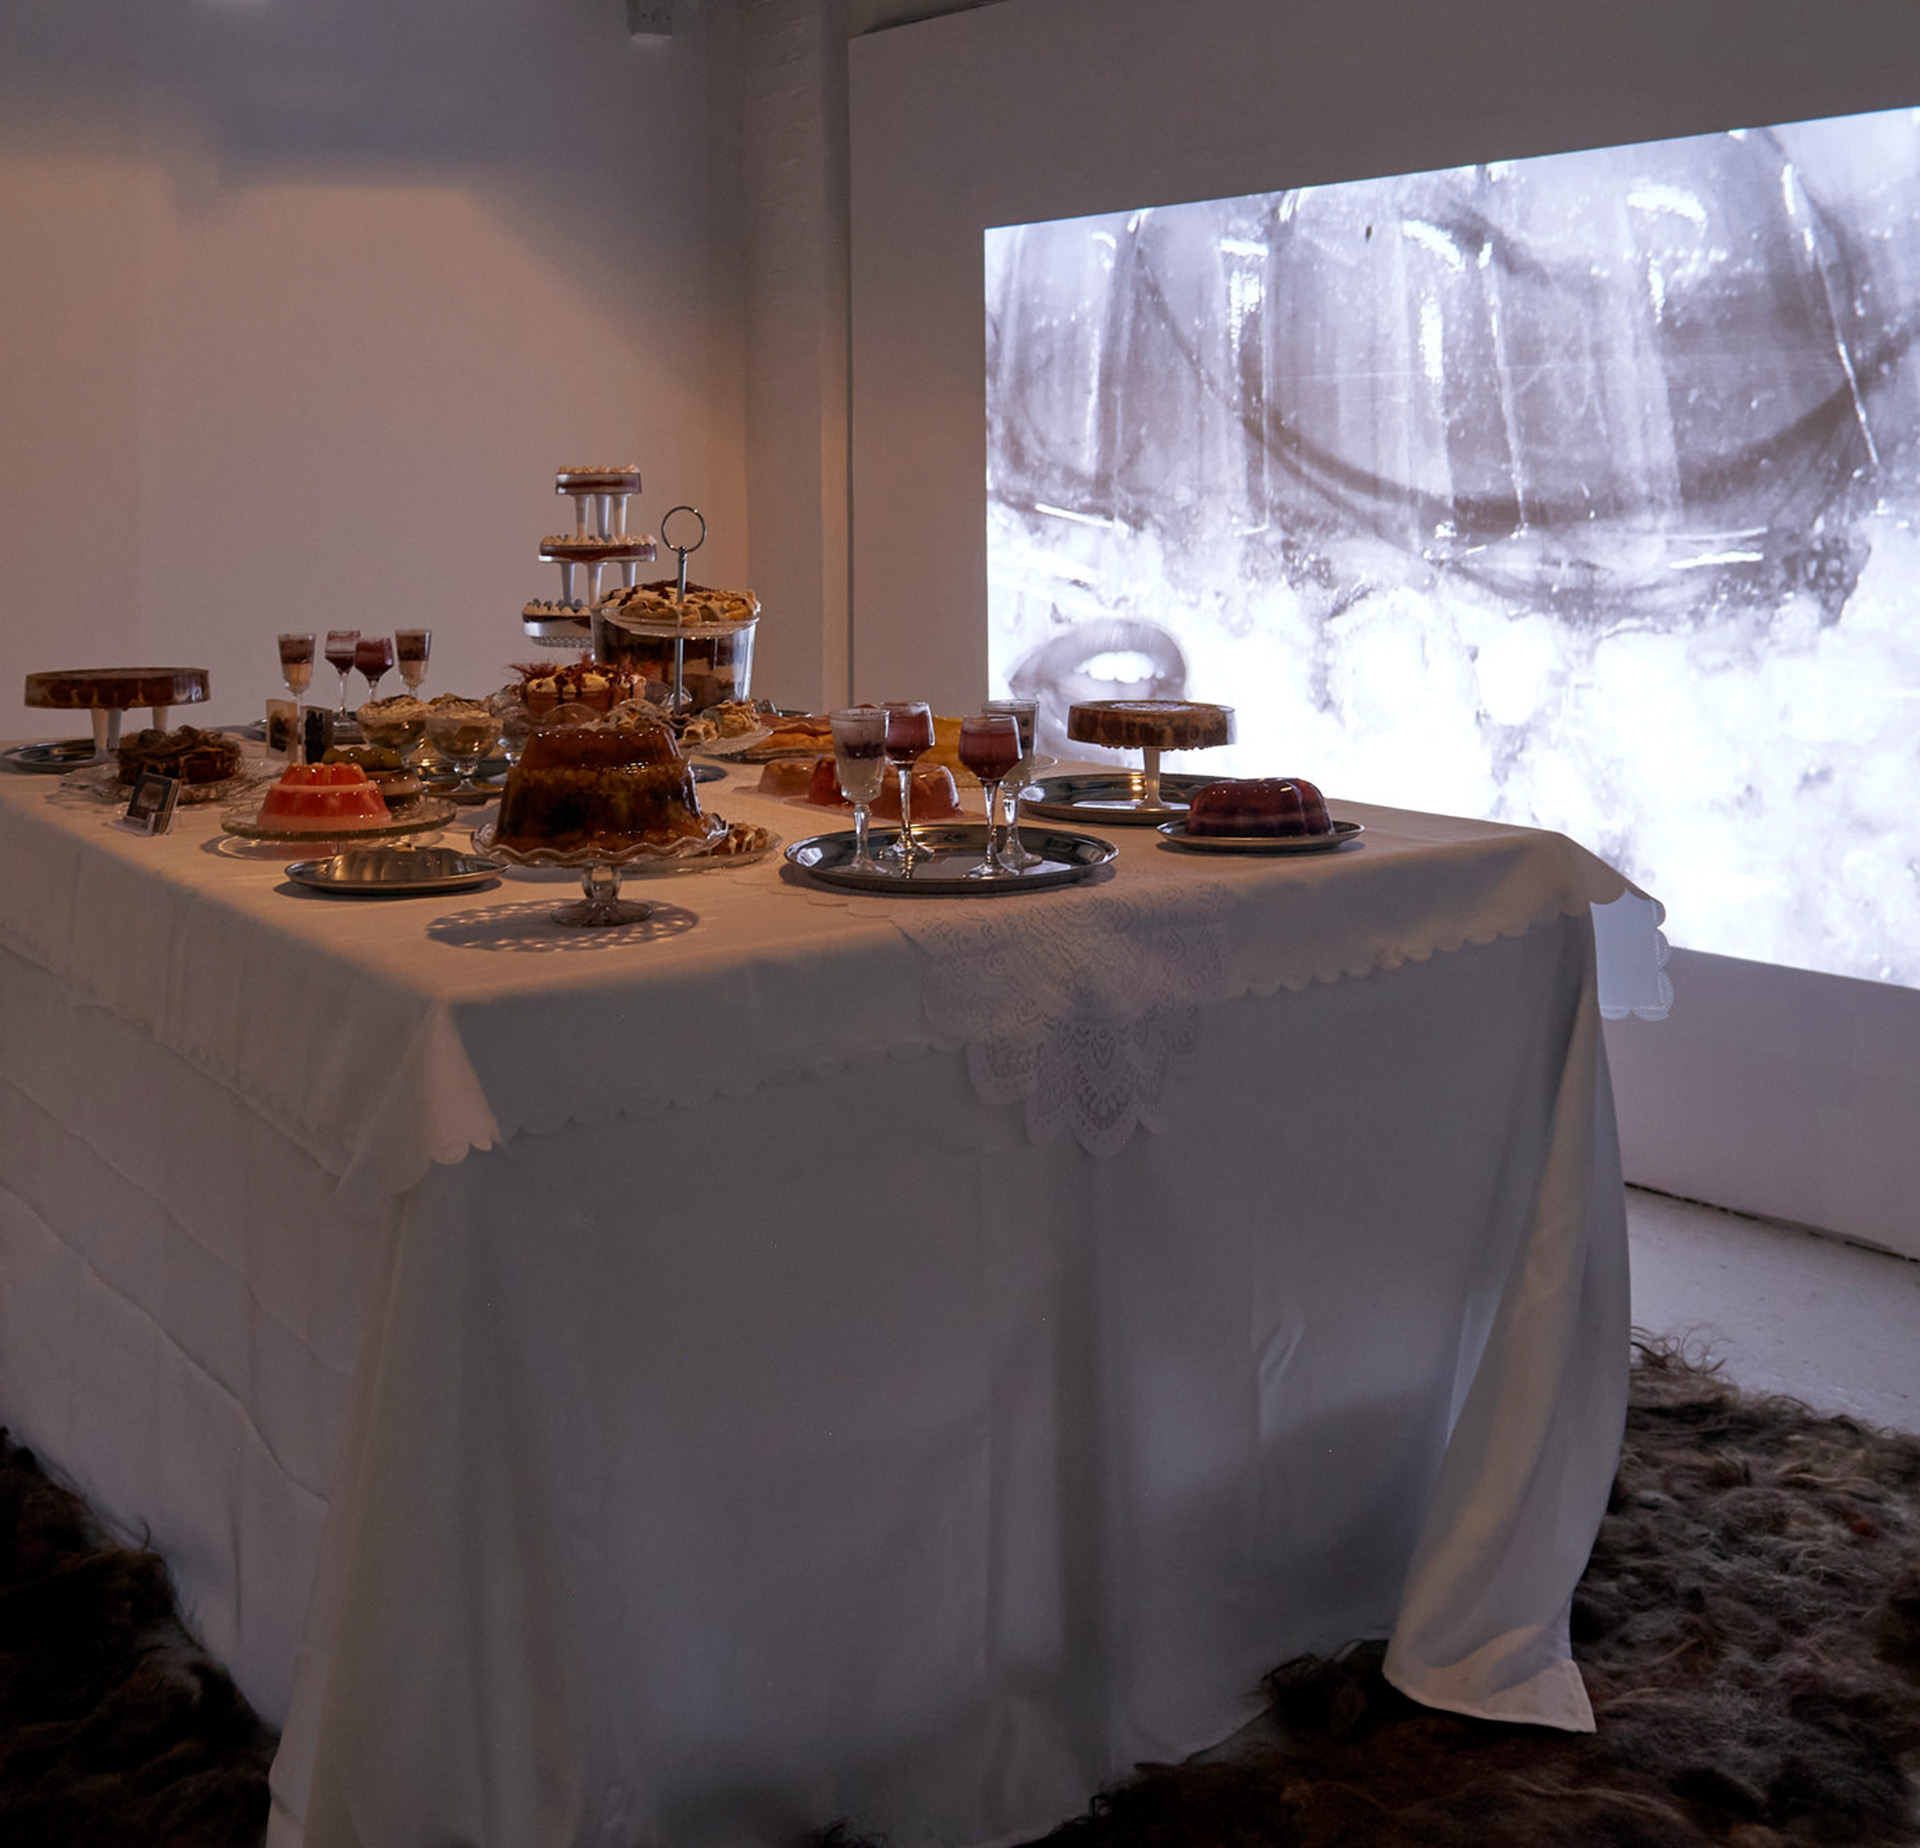 BA Fine Art work by Chloe Lees showing a table decorated with jellied foods and other items.